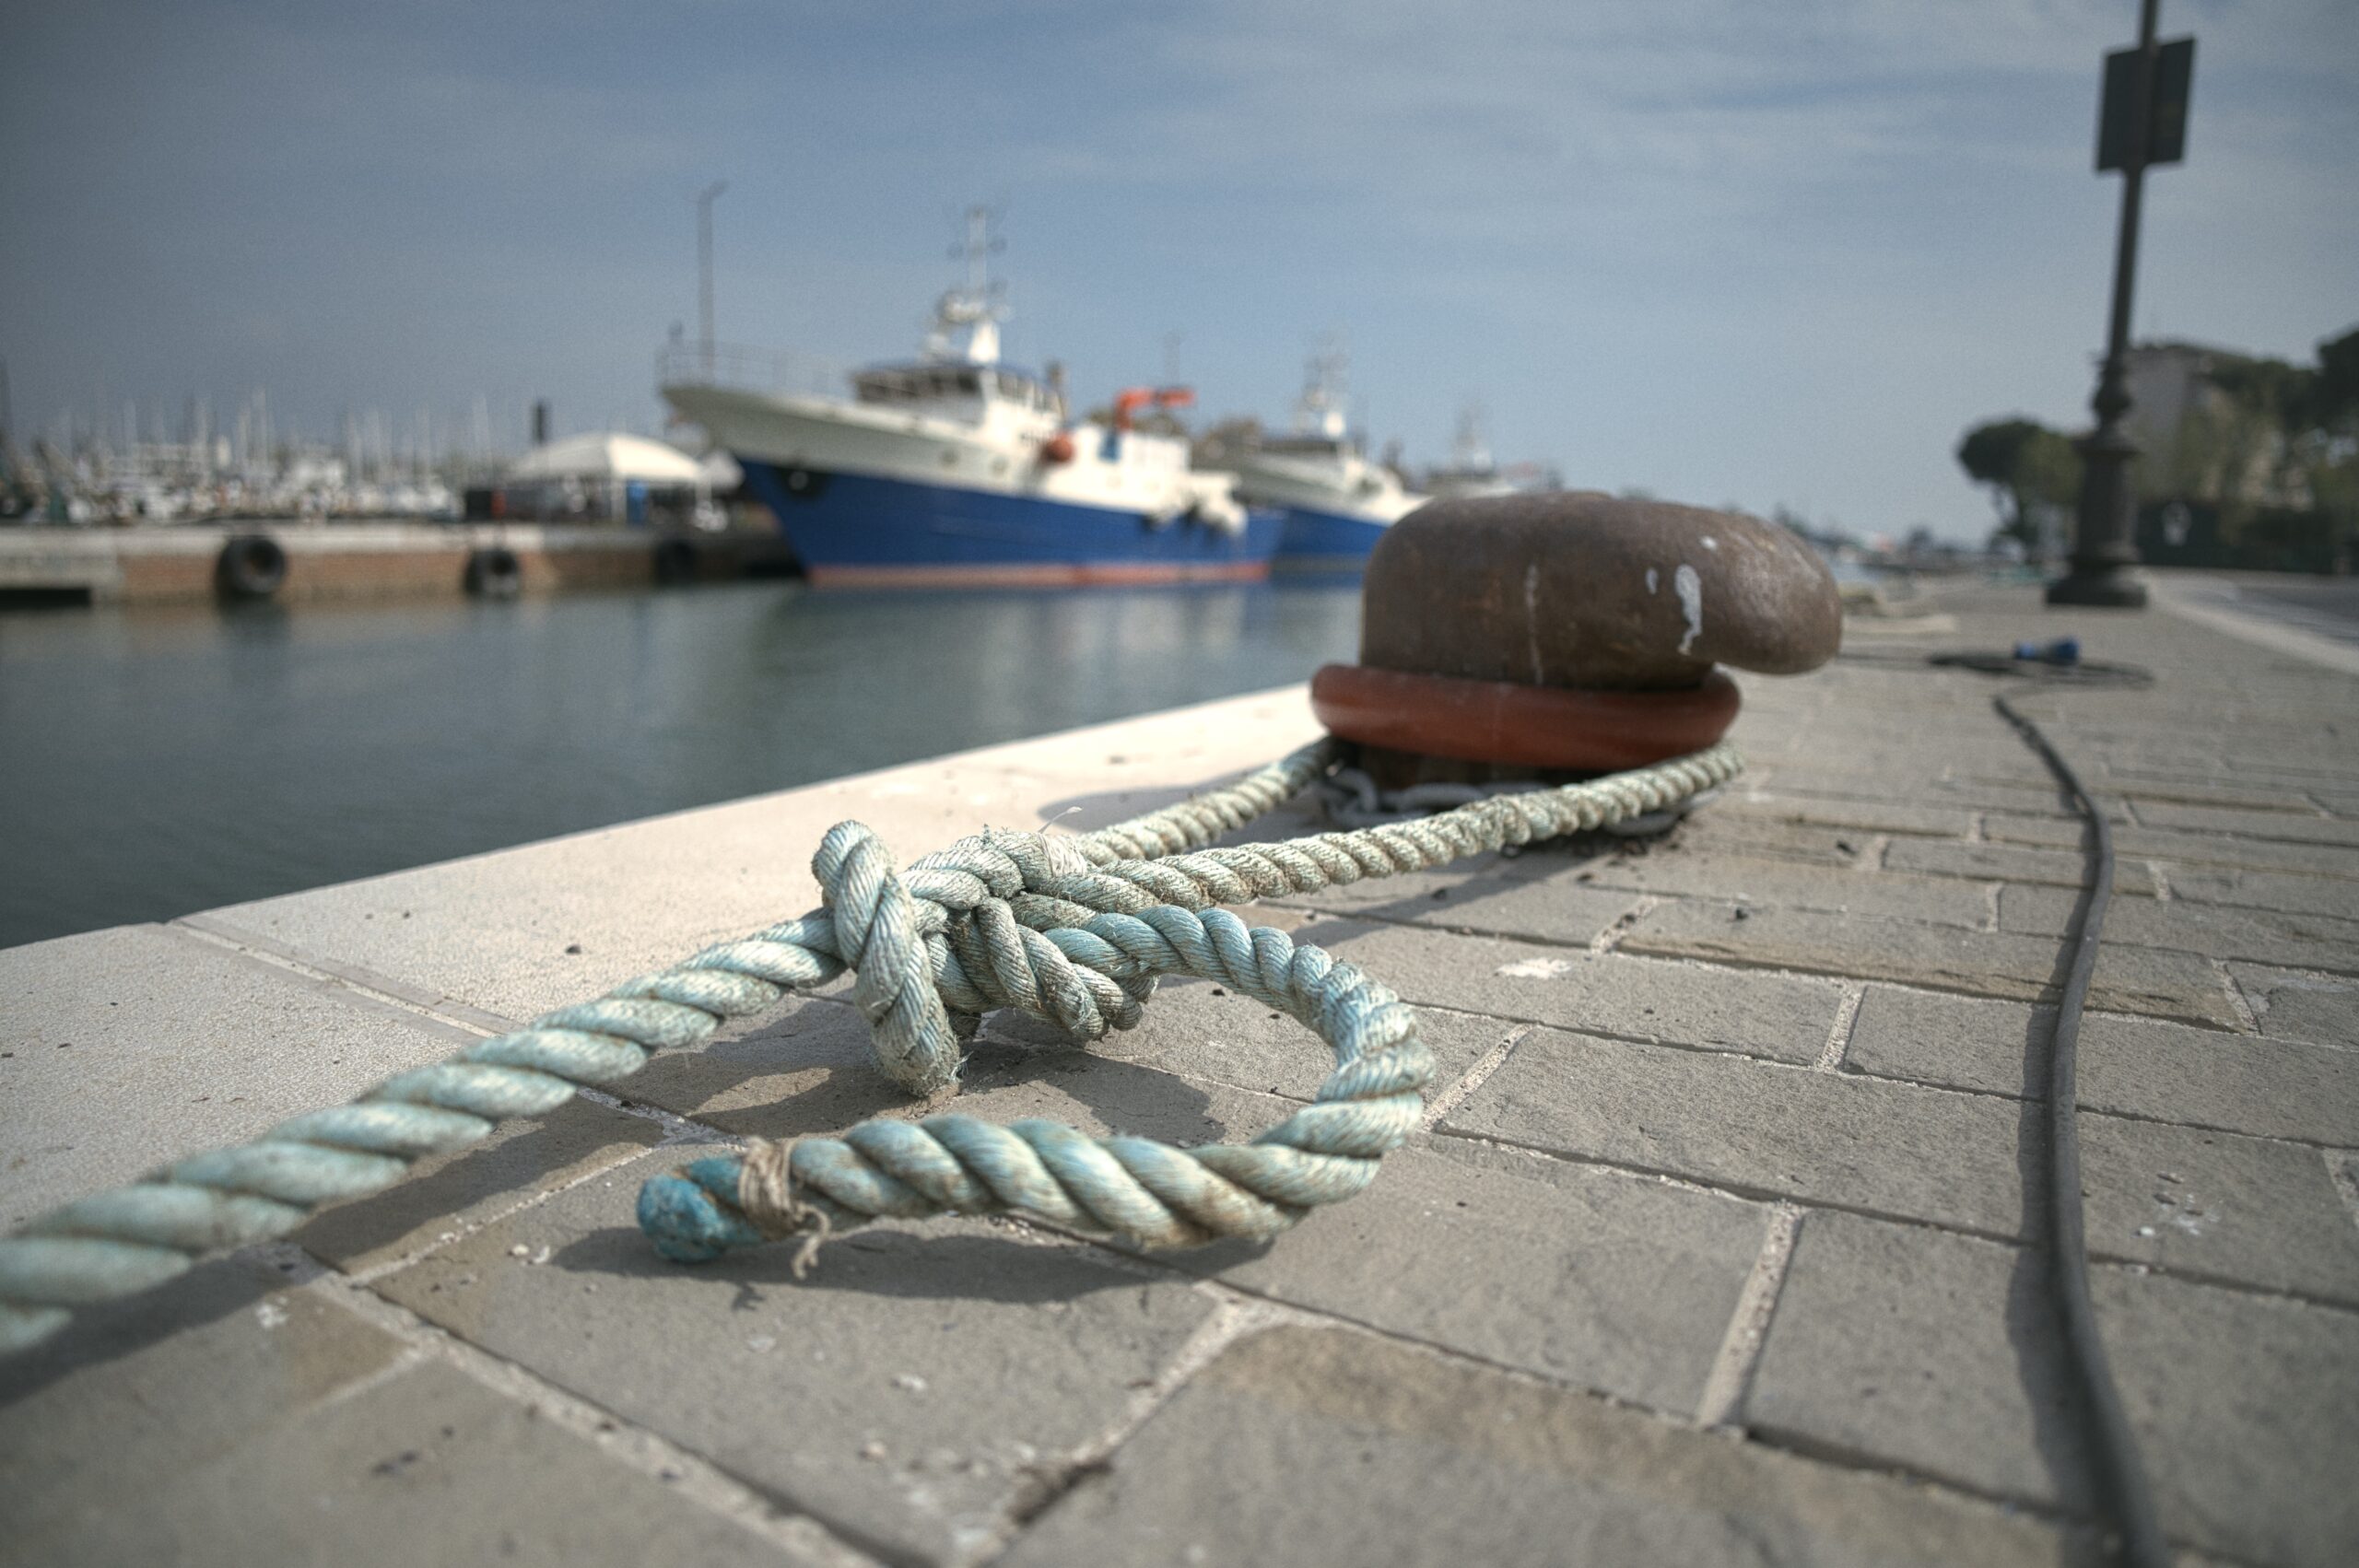 dock-of-a-harbor-with-a-tied-rope-of-a-boat